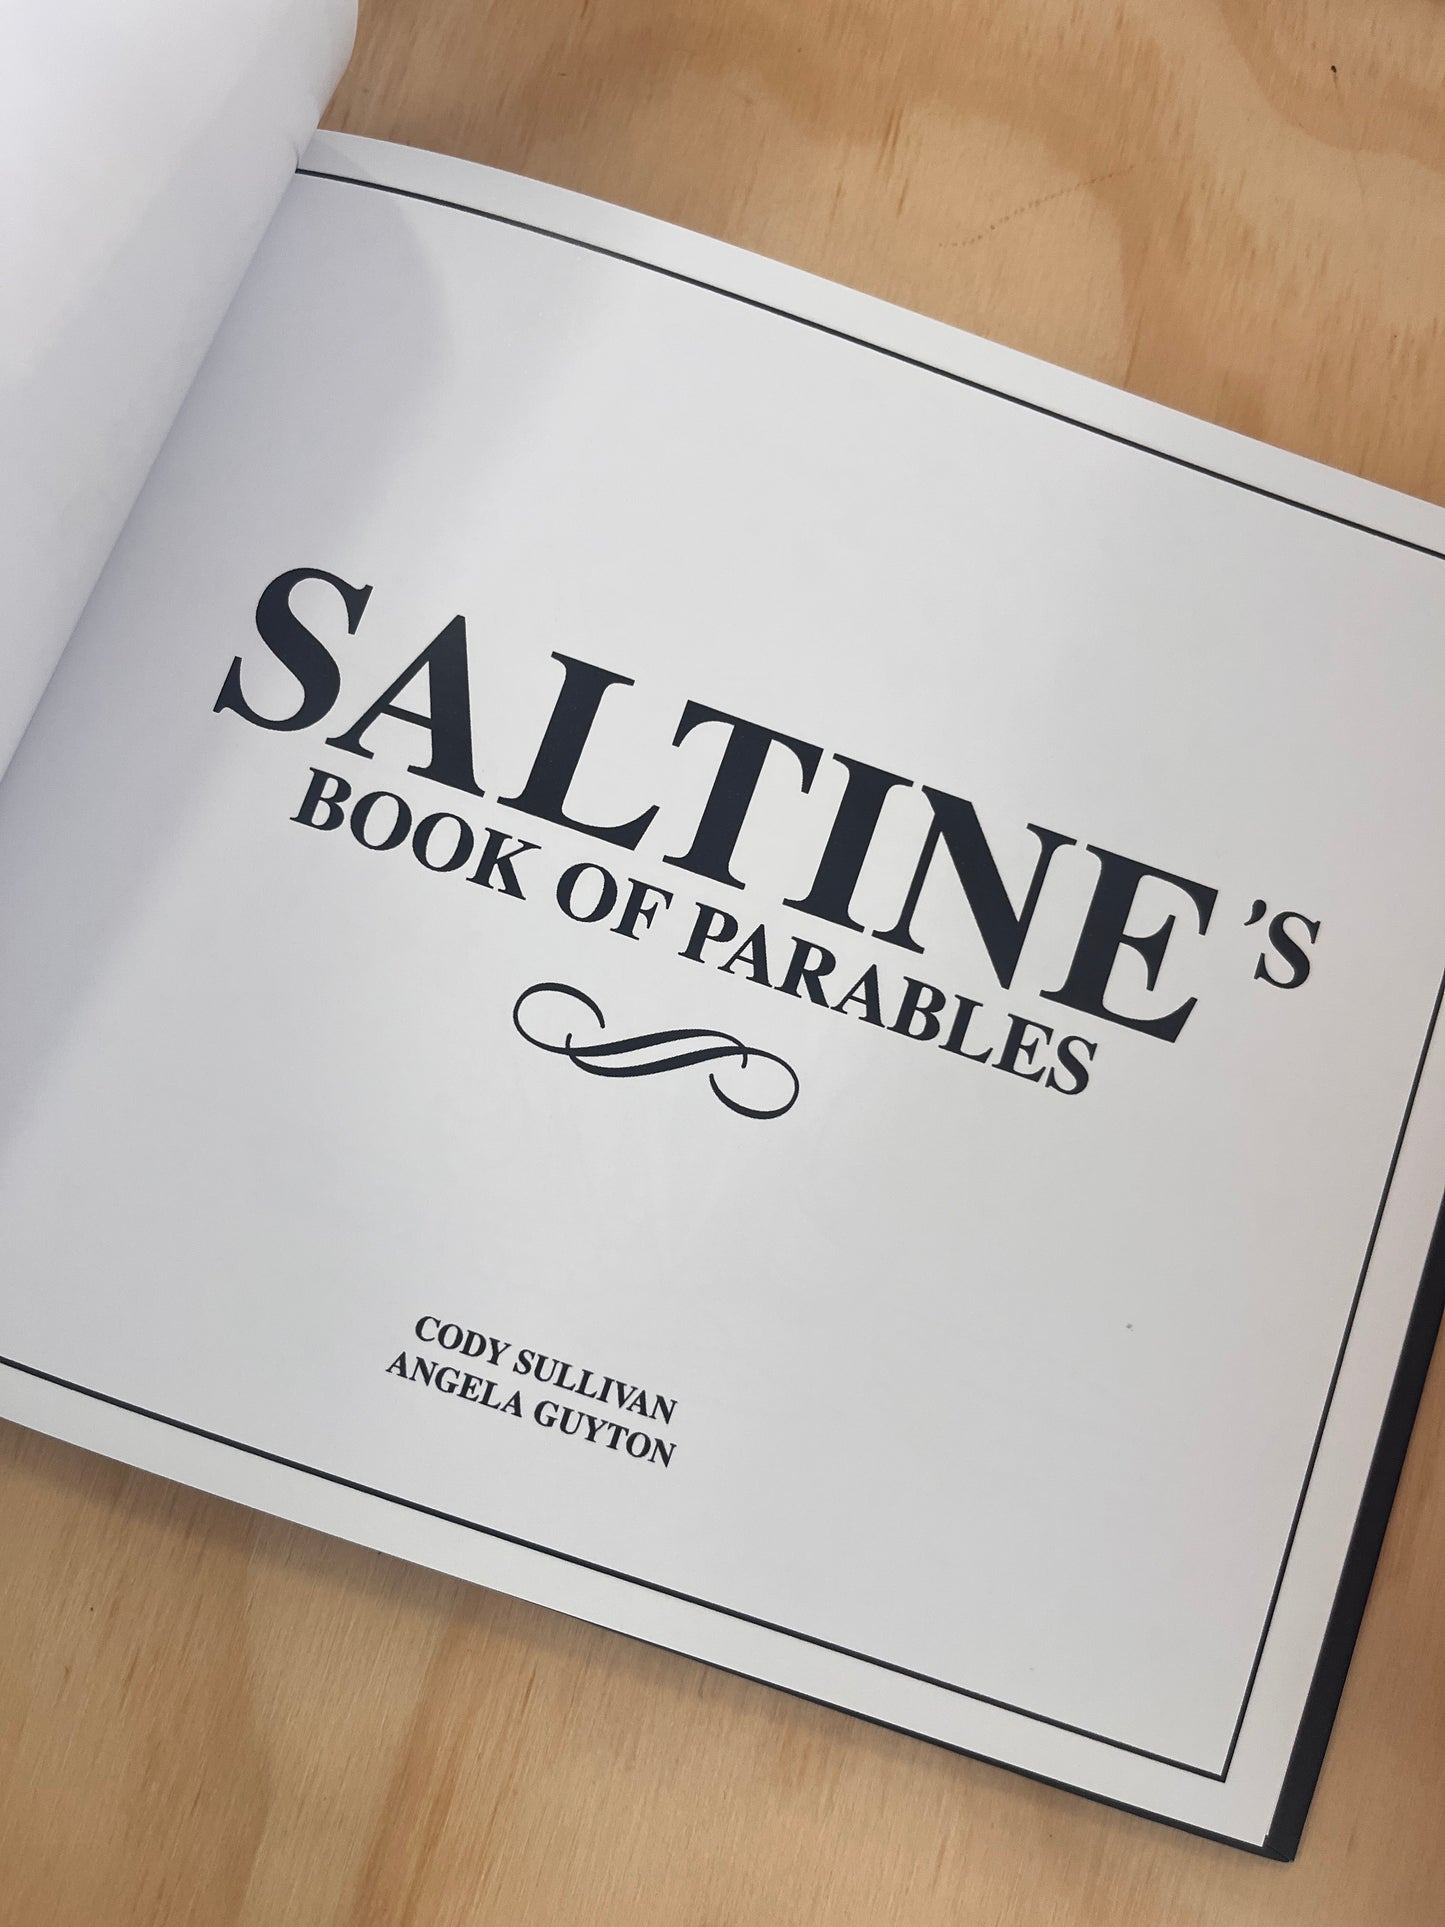 Saltine's Book of Parables